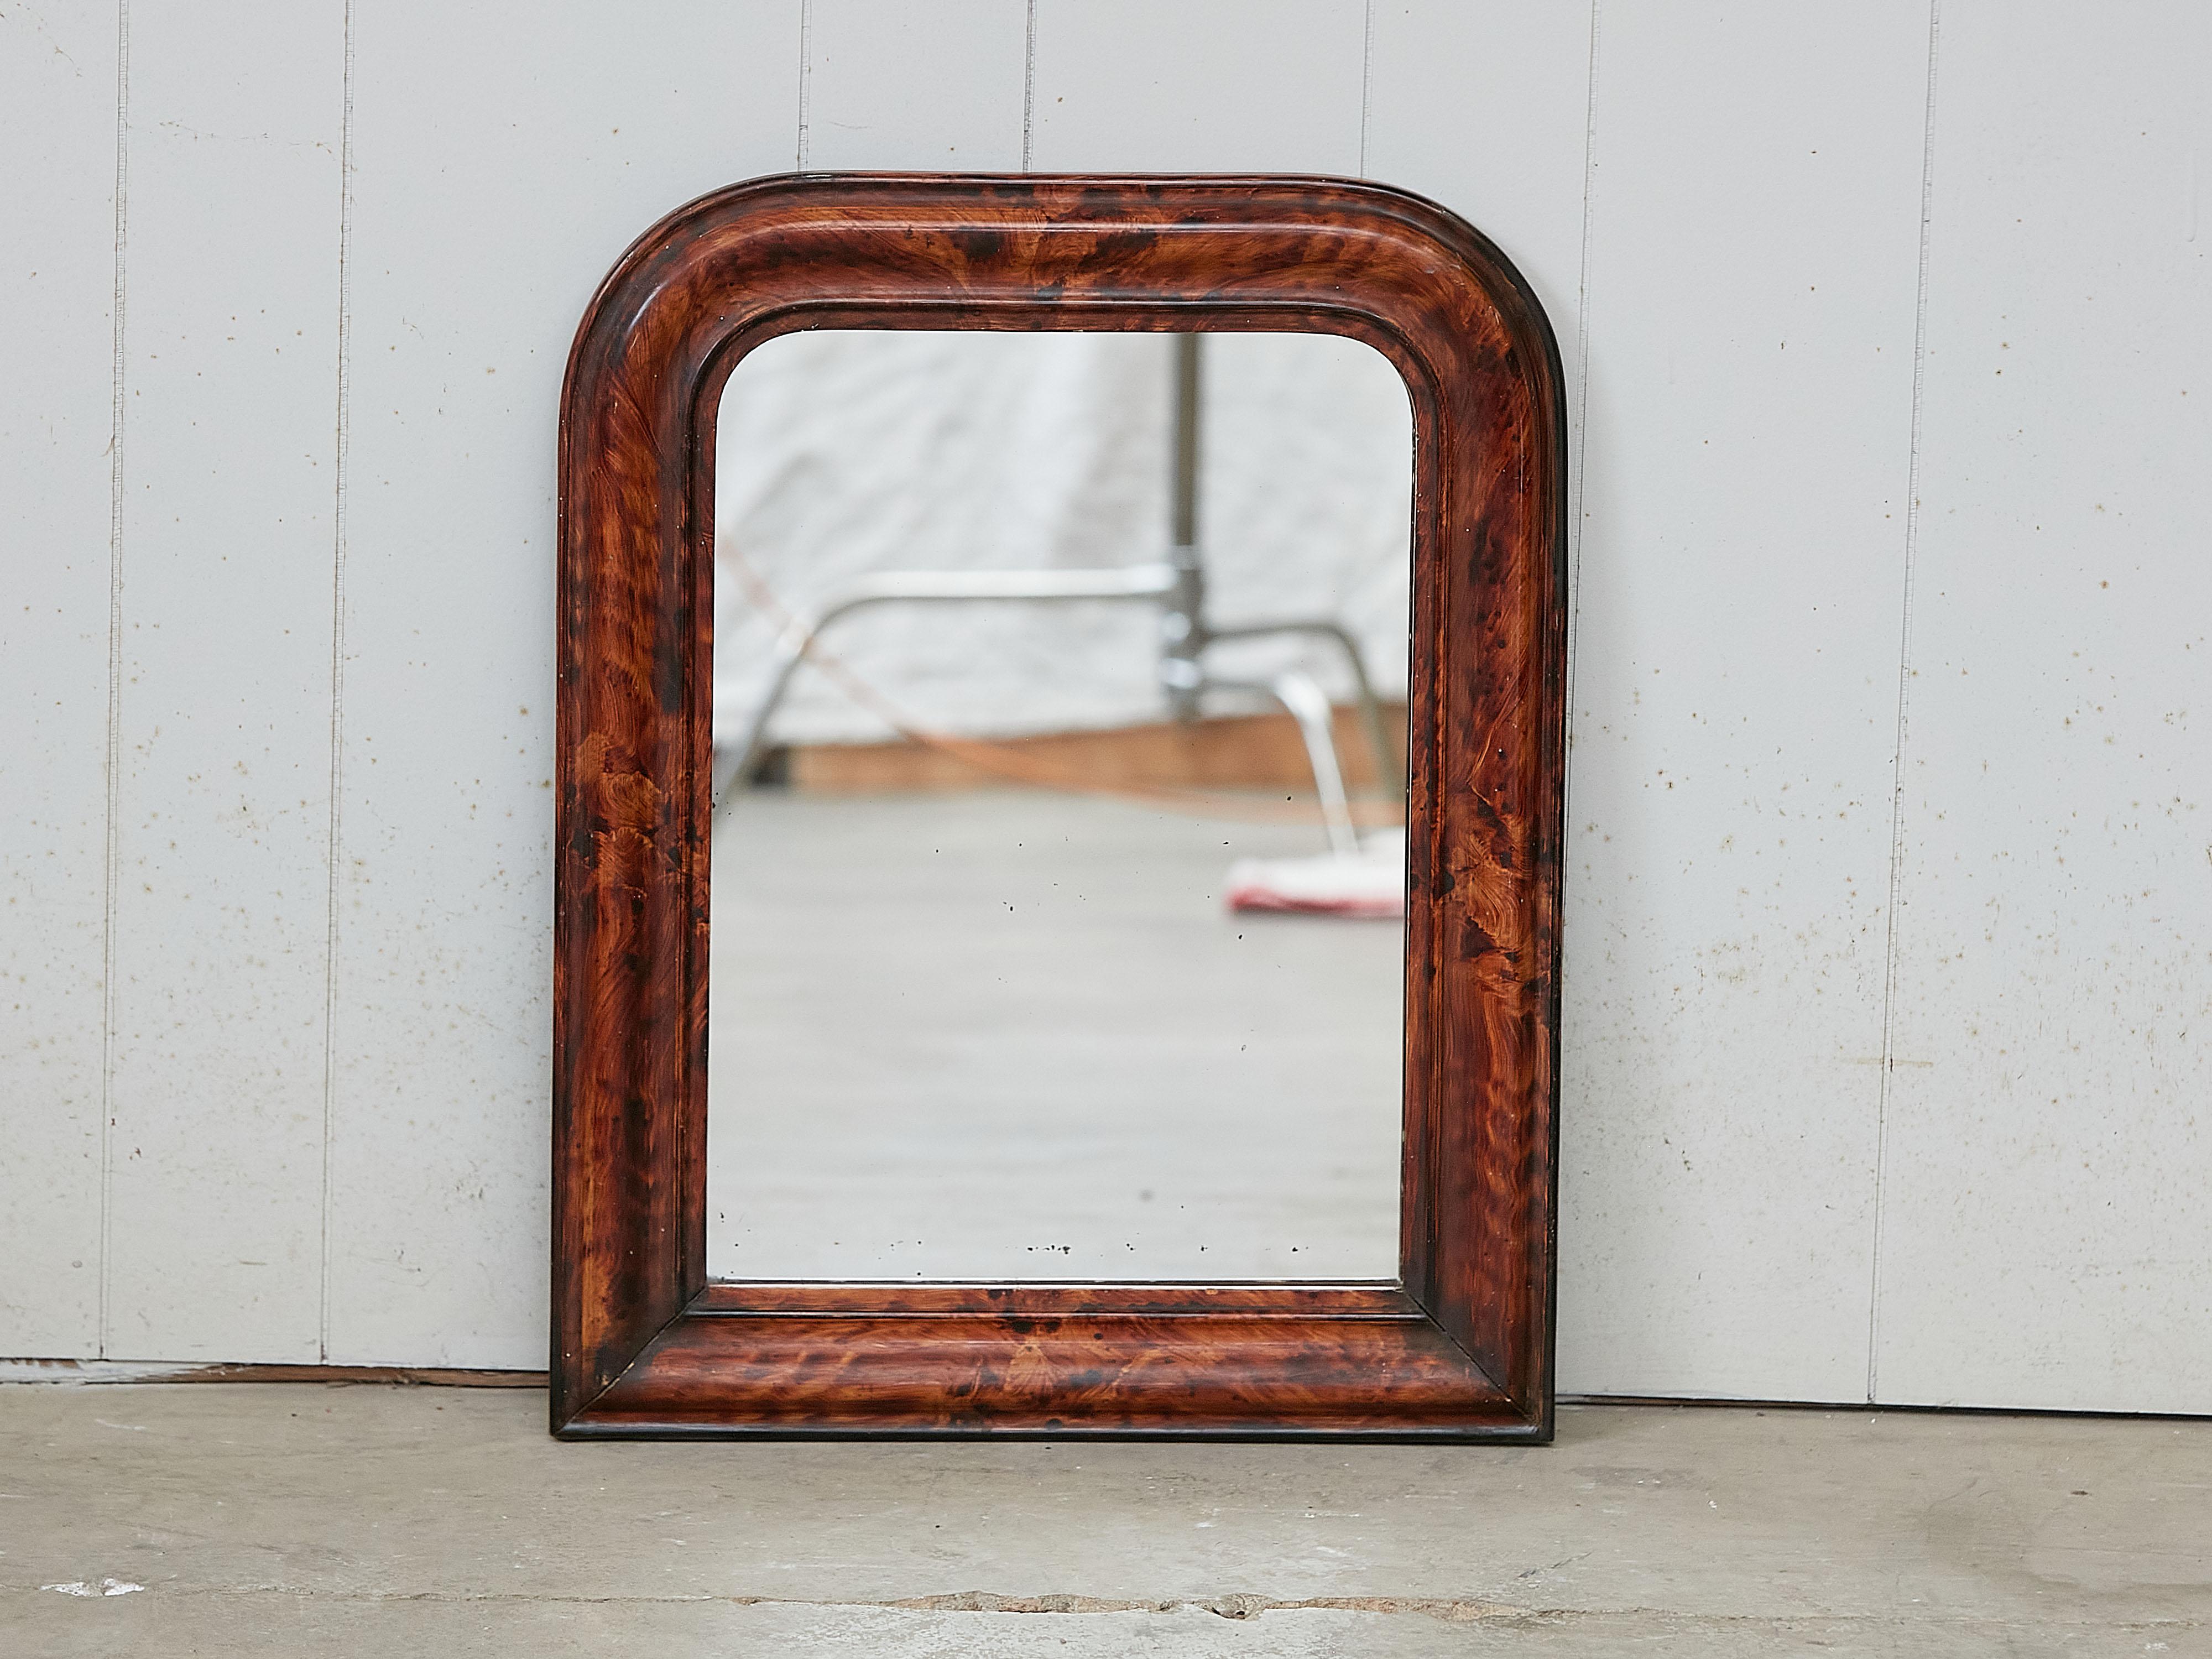 A small French Louis-Philippe style wooden mirror from the early 20th century, with faux tortoise style painted frame and rounded corners in the upper section. Created in France during the turn of the century which saw the transition between the